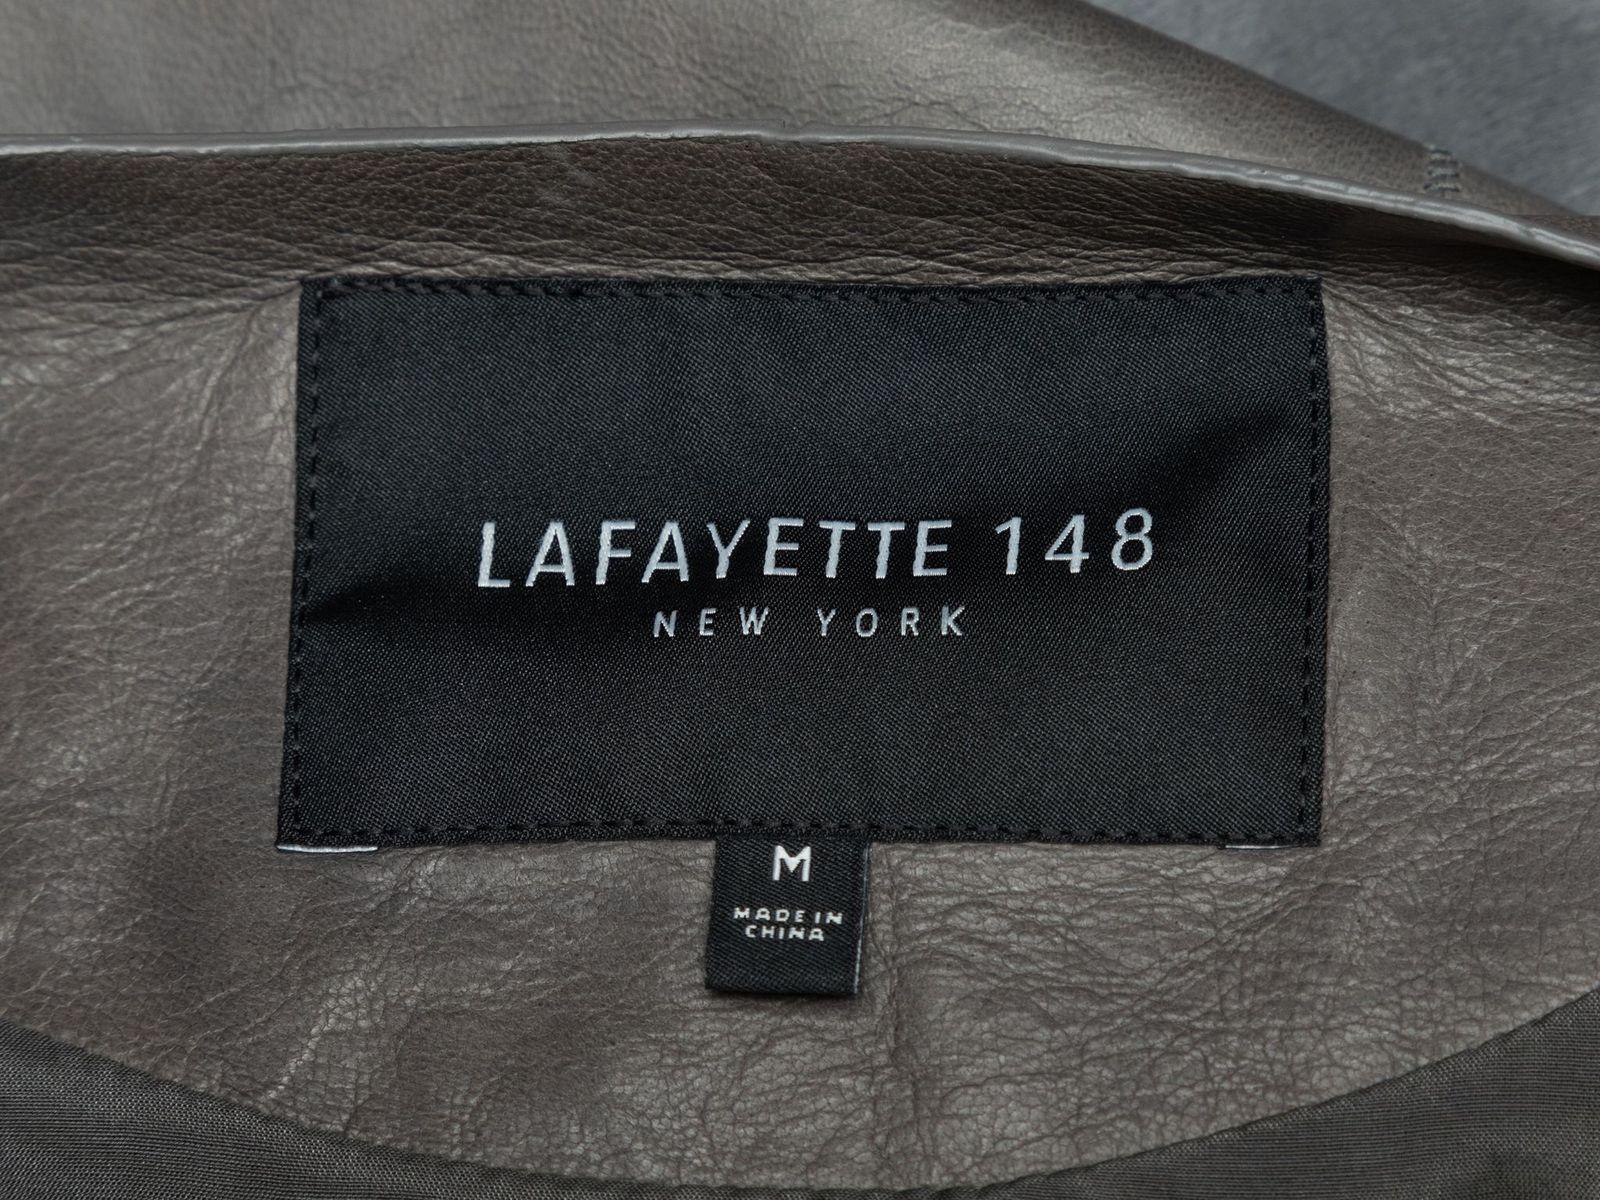 Product Details: Grey and silver leather, ponyhair, and virgin wool patchwork jacket by Lafayette 148. Crew neck. Zip closure at front. 36